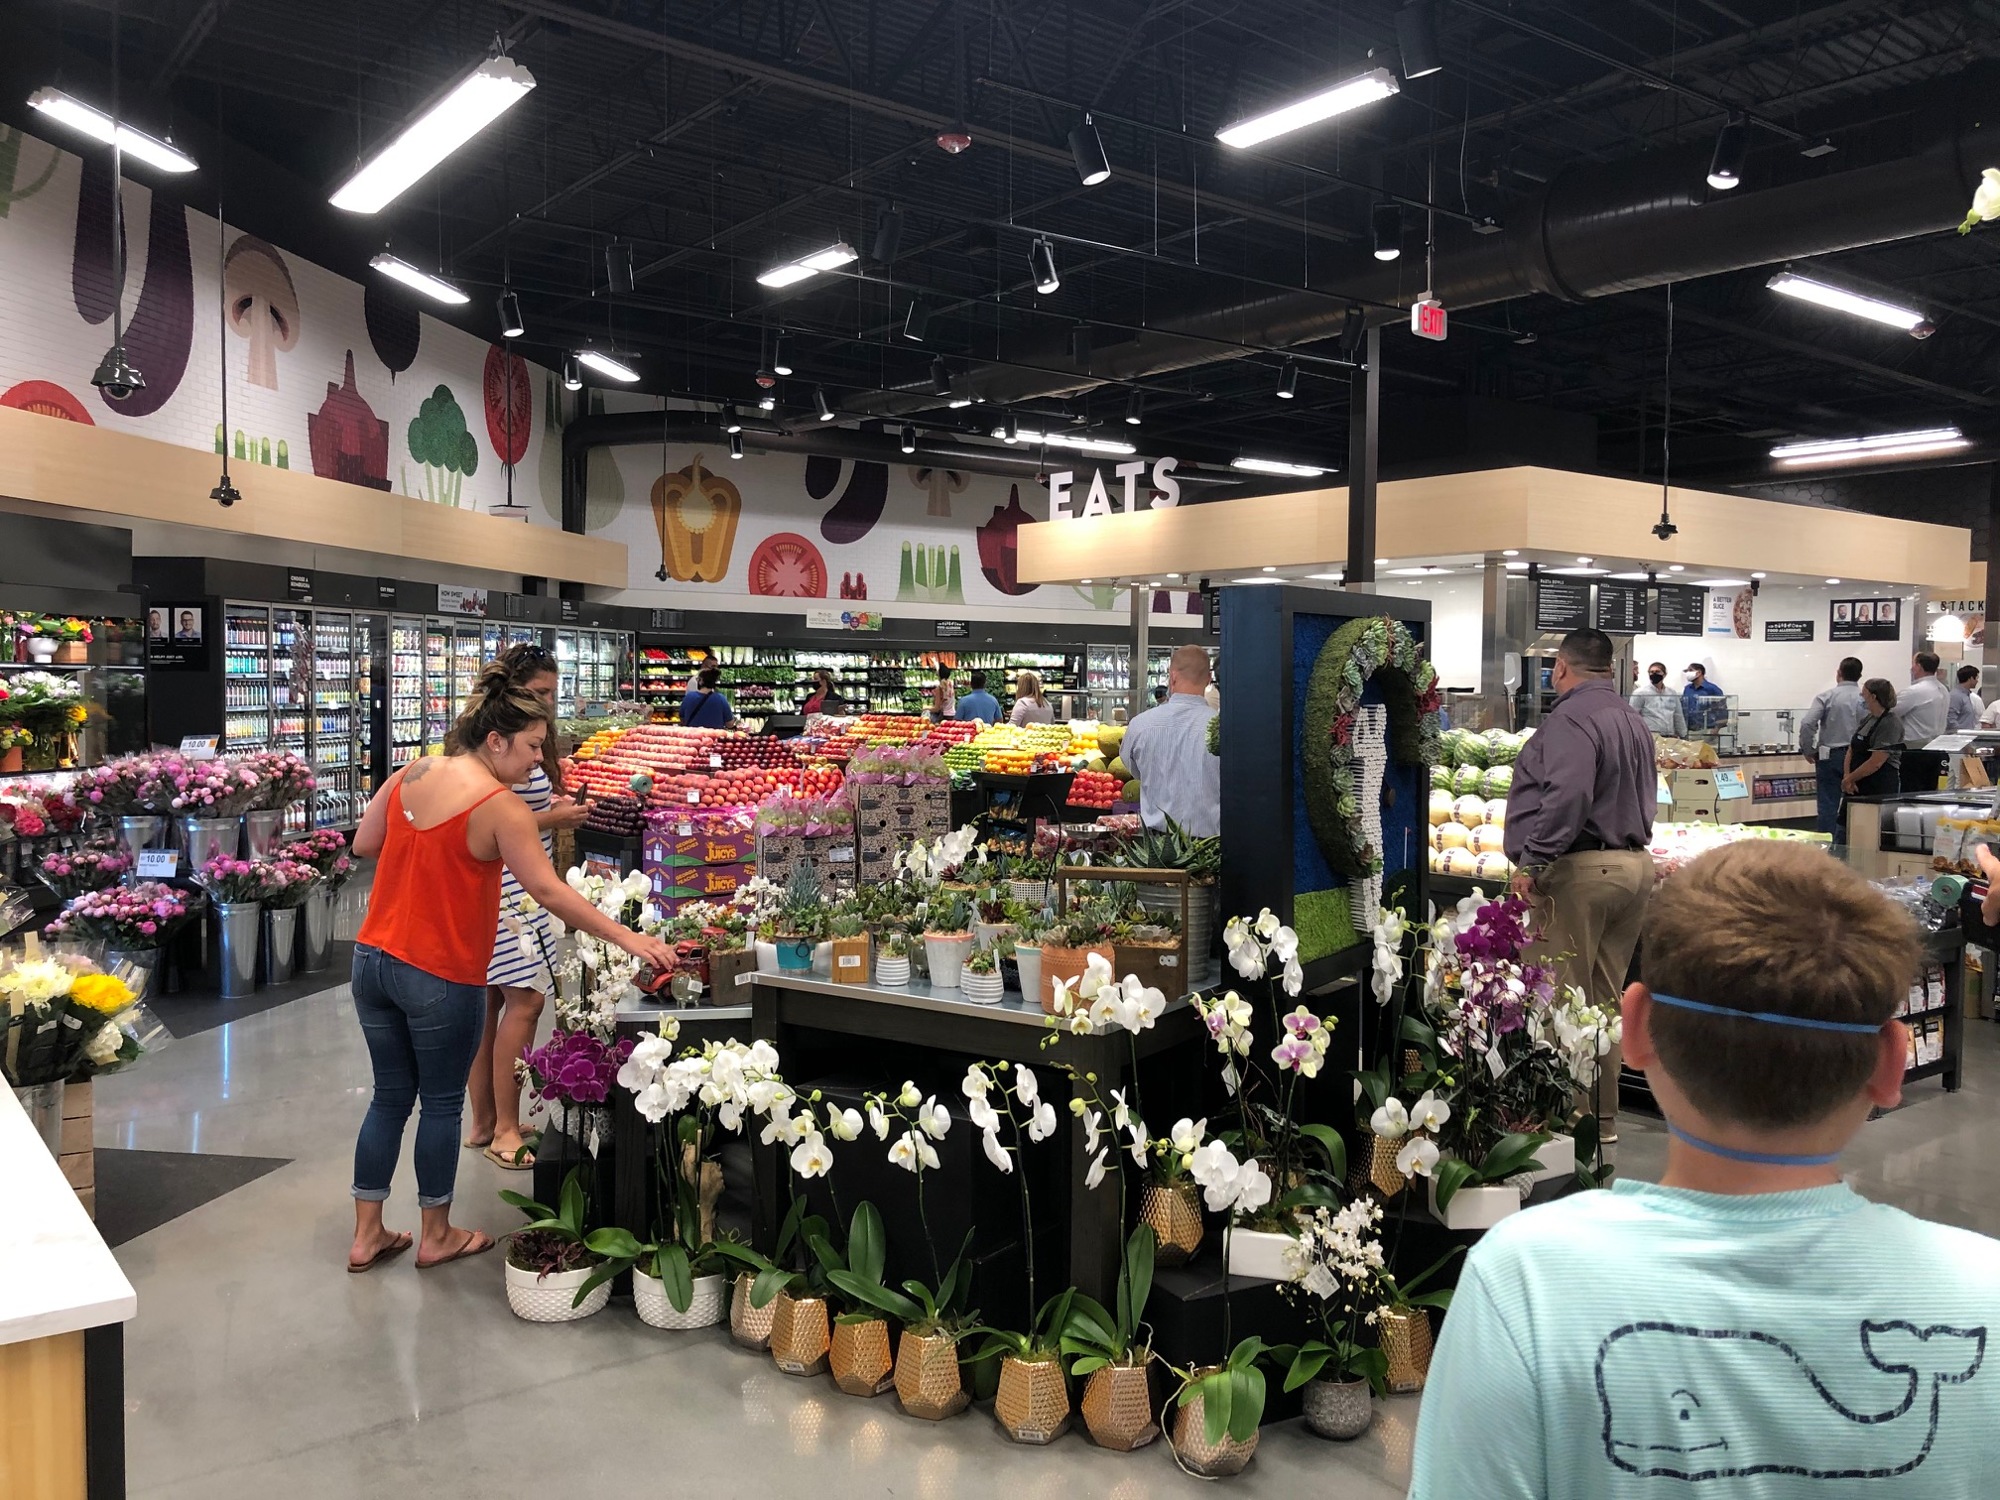 The inside of the GreenWise Market is divided into zones for product categories. (Photo by Karen Brune Mathis)